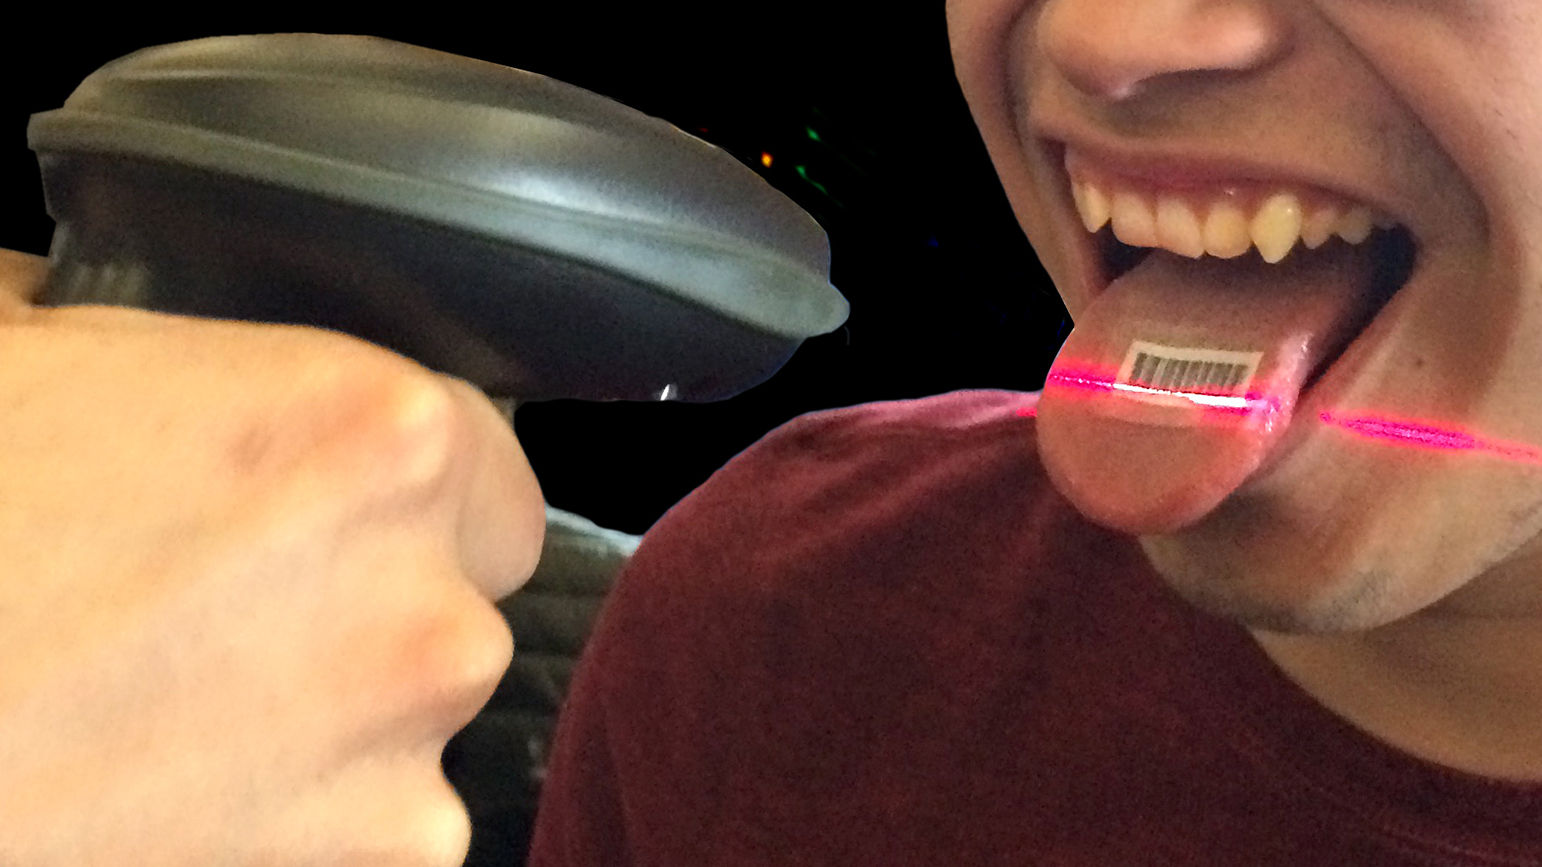 Photograph of a barcode scanner scanning a barcode on a person's tongue.